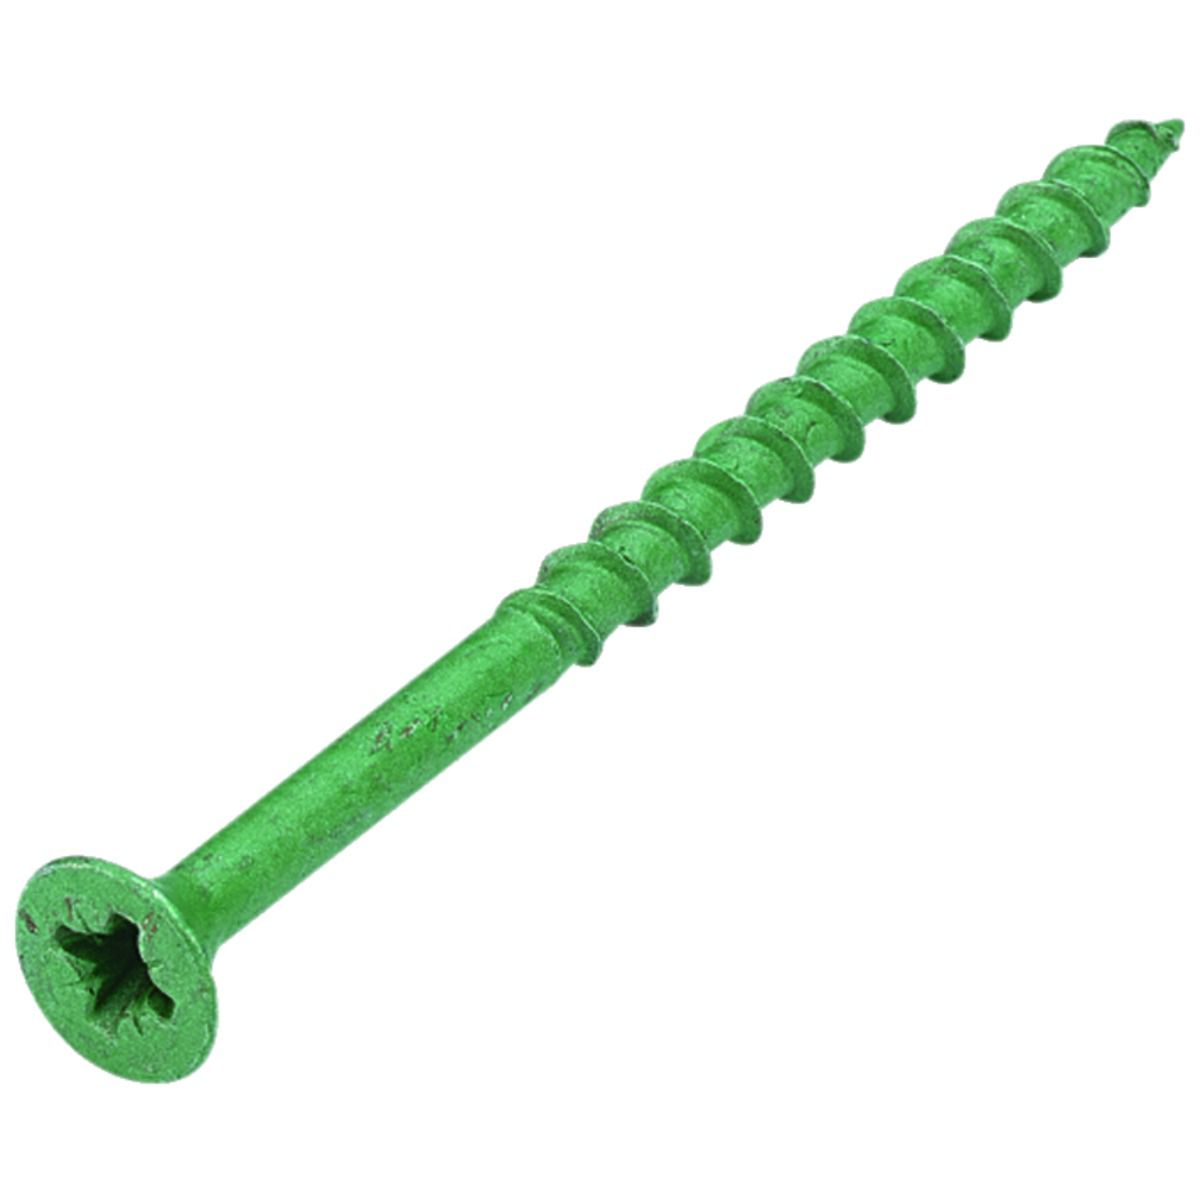 Image of Wickes External Grade Screw - Green No 8 x 63mm Pack of 350